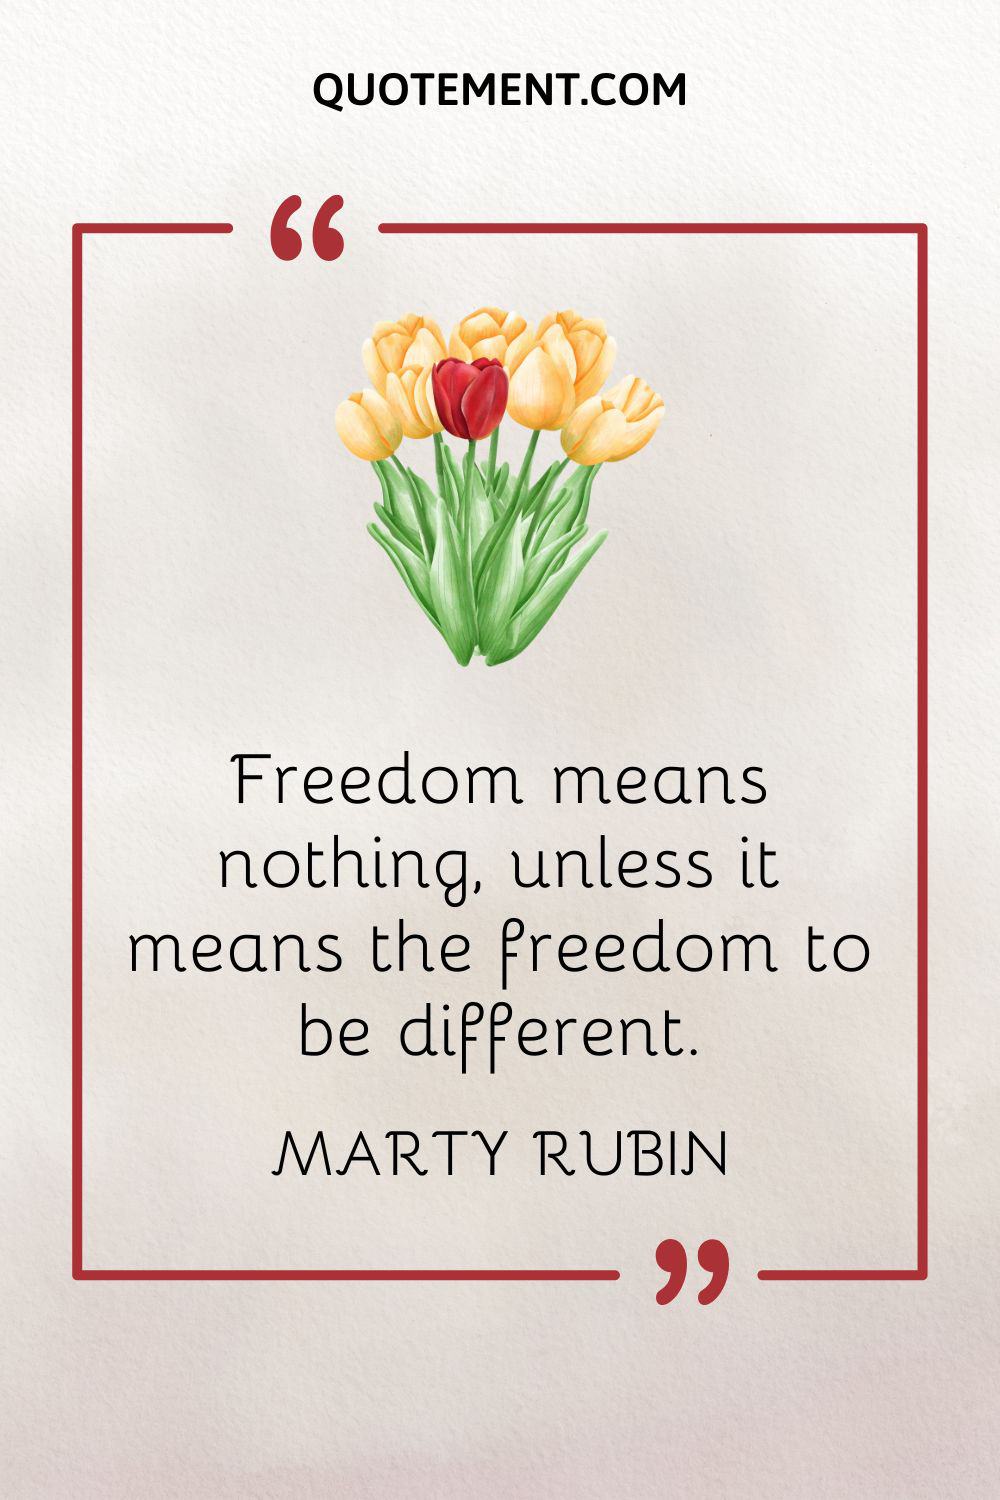 Freedom means nothing, unless it means the freedom to be different.